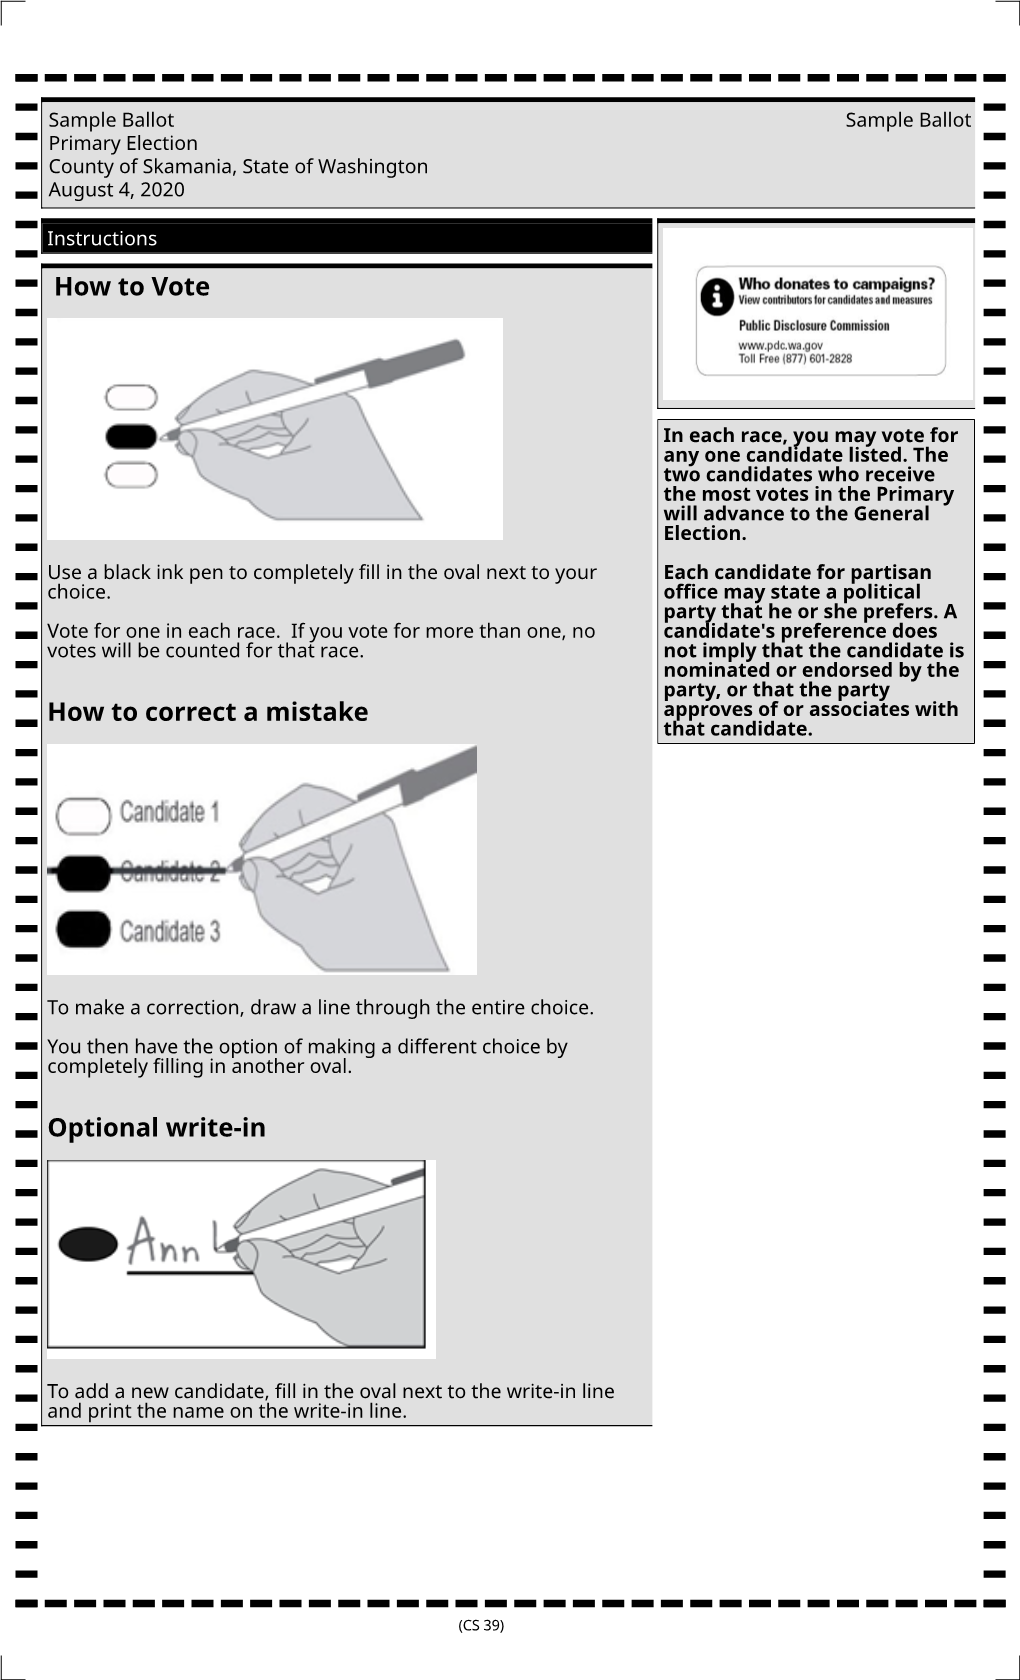 How to Vote How to Correct a Mistake Optional Write-In